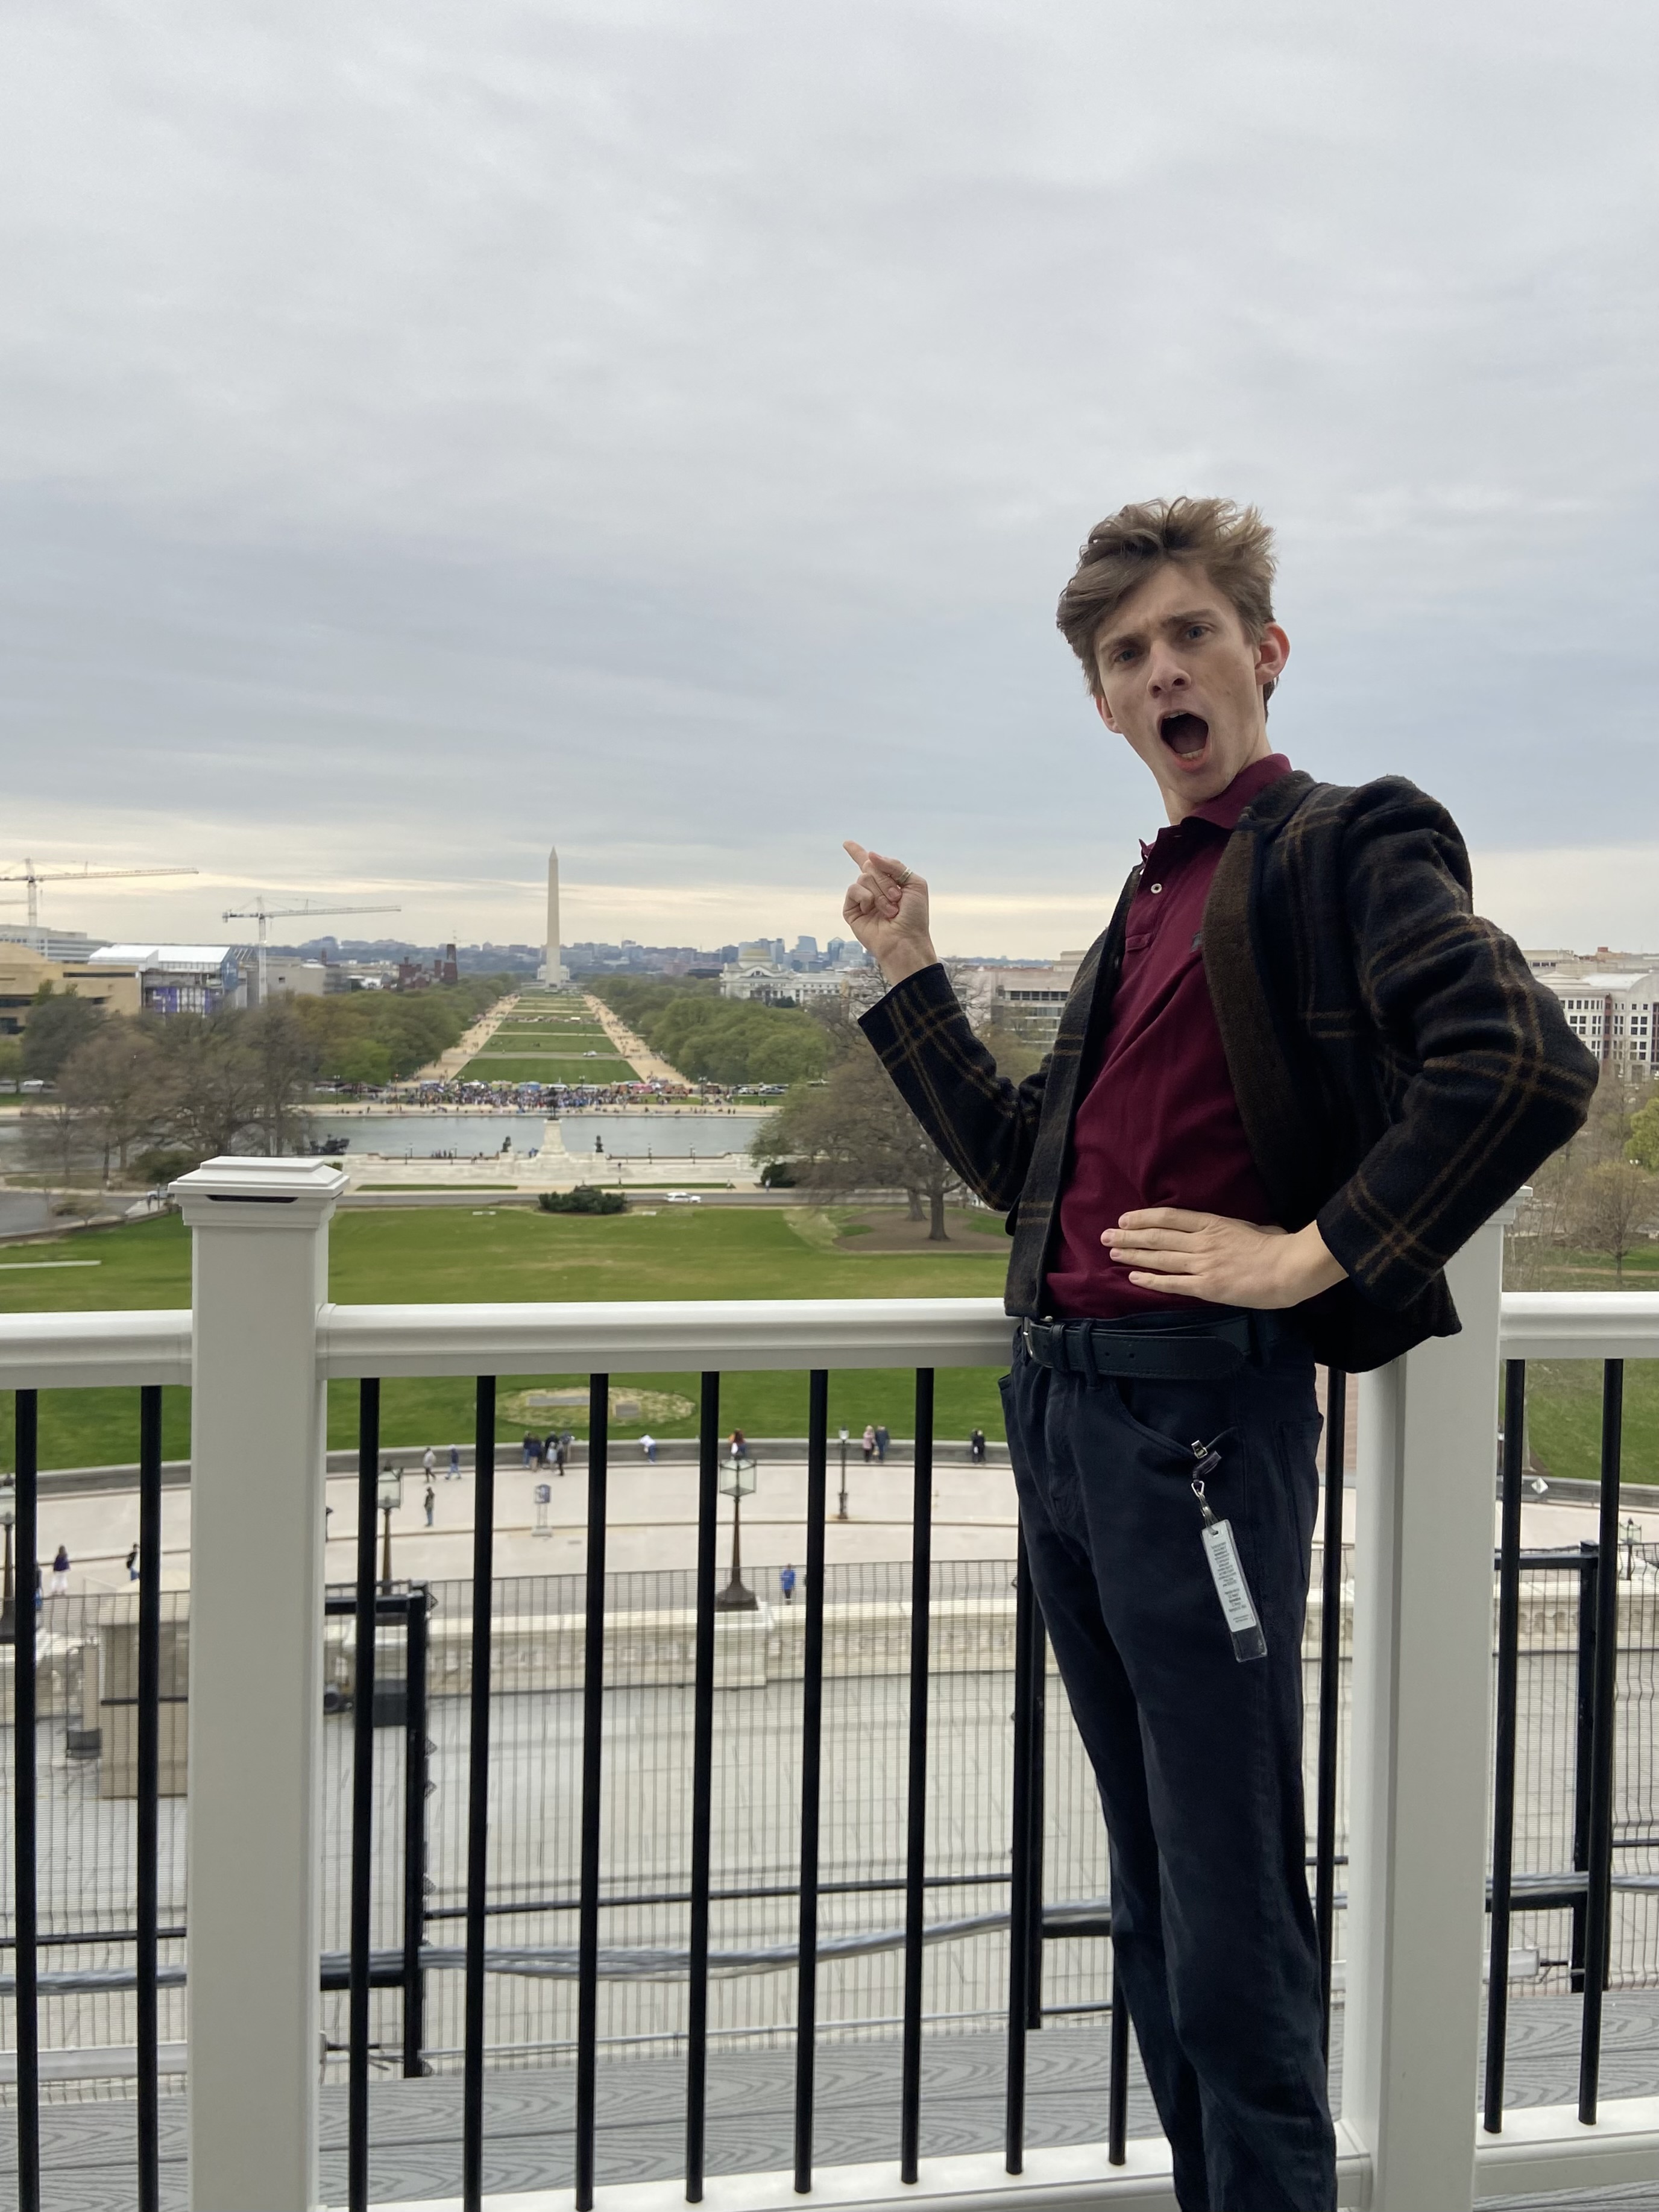 Spring 2023 UCDC Fellow Alejandro Alvarez standing with the Washington Monument in the distance